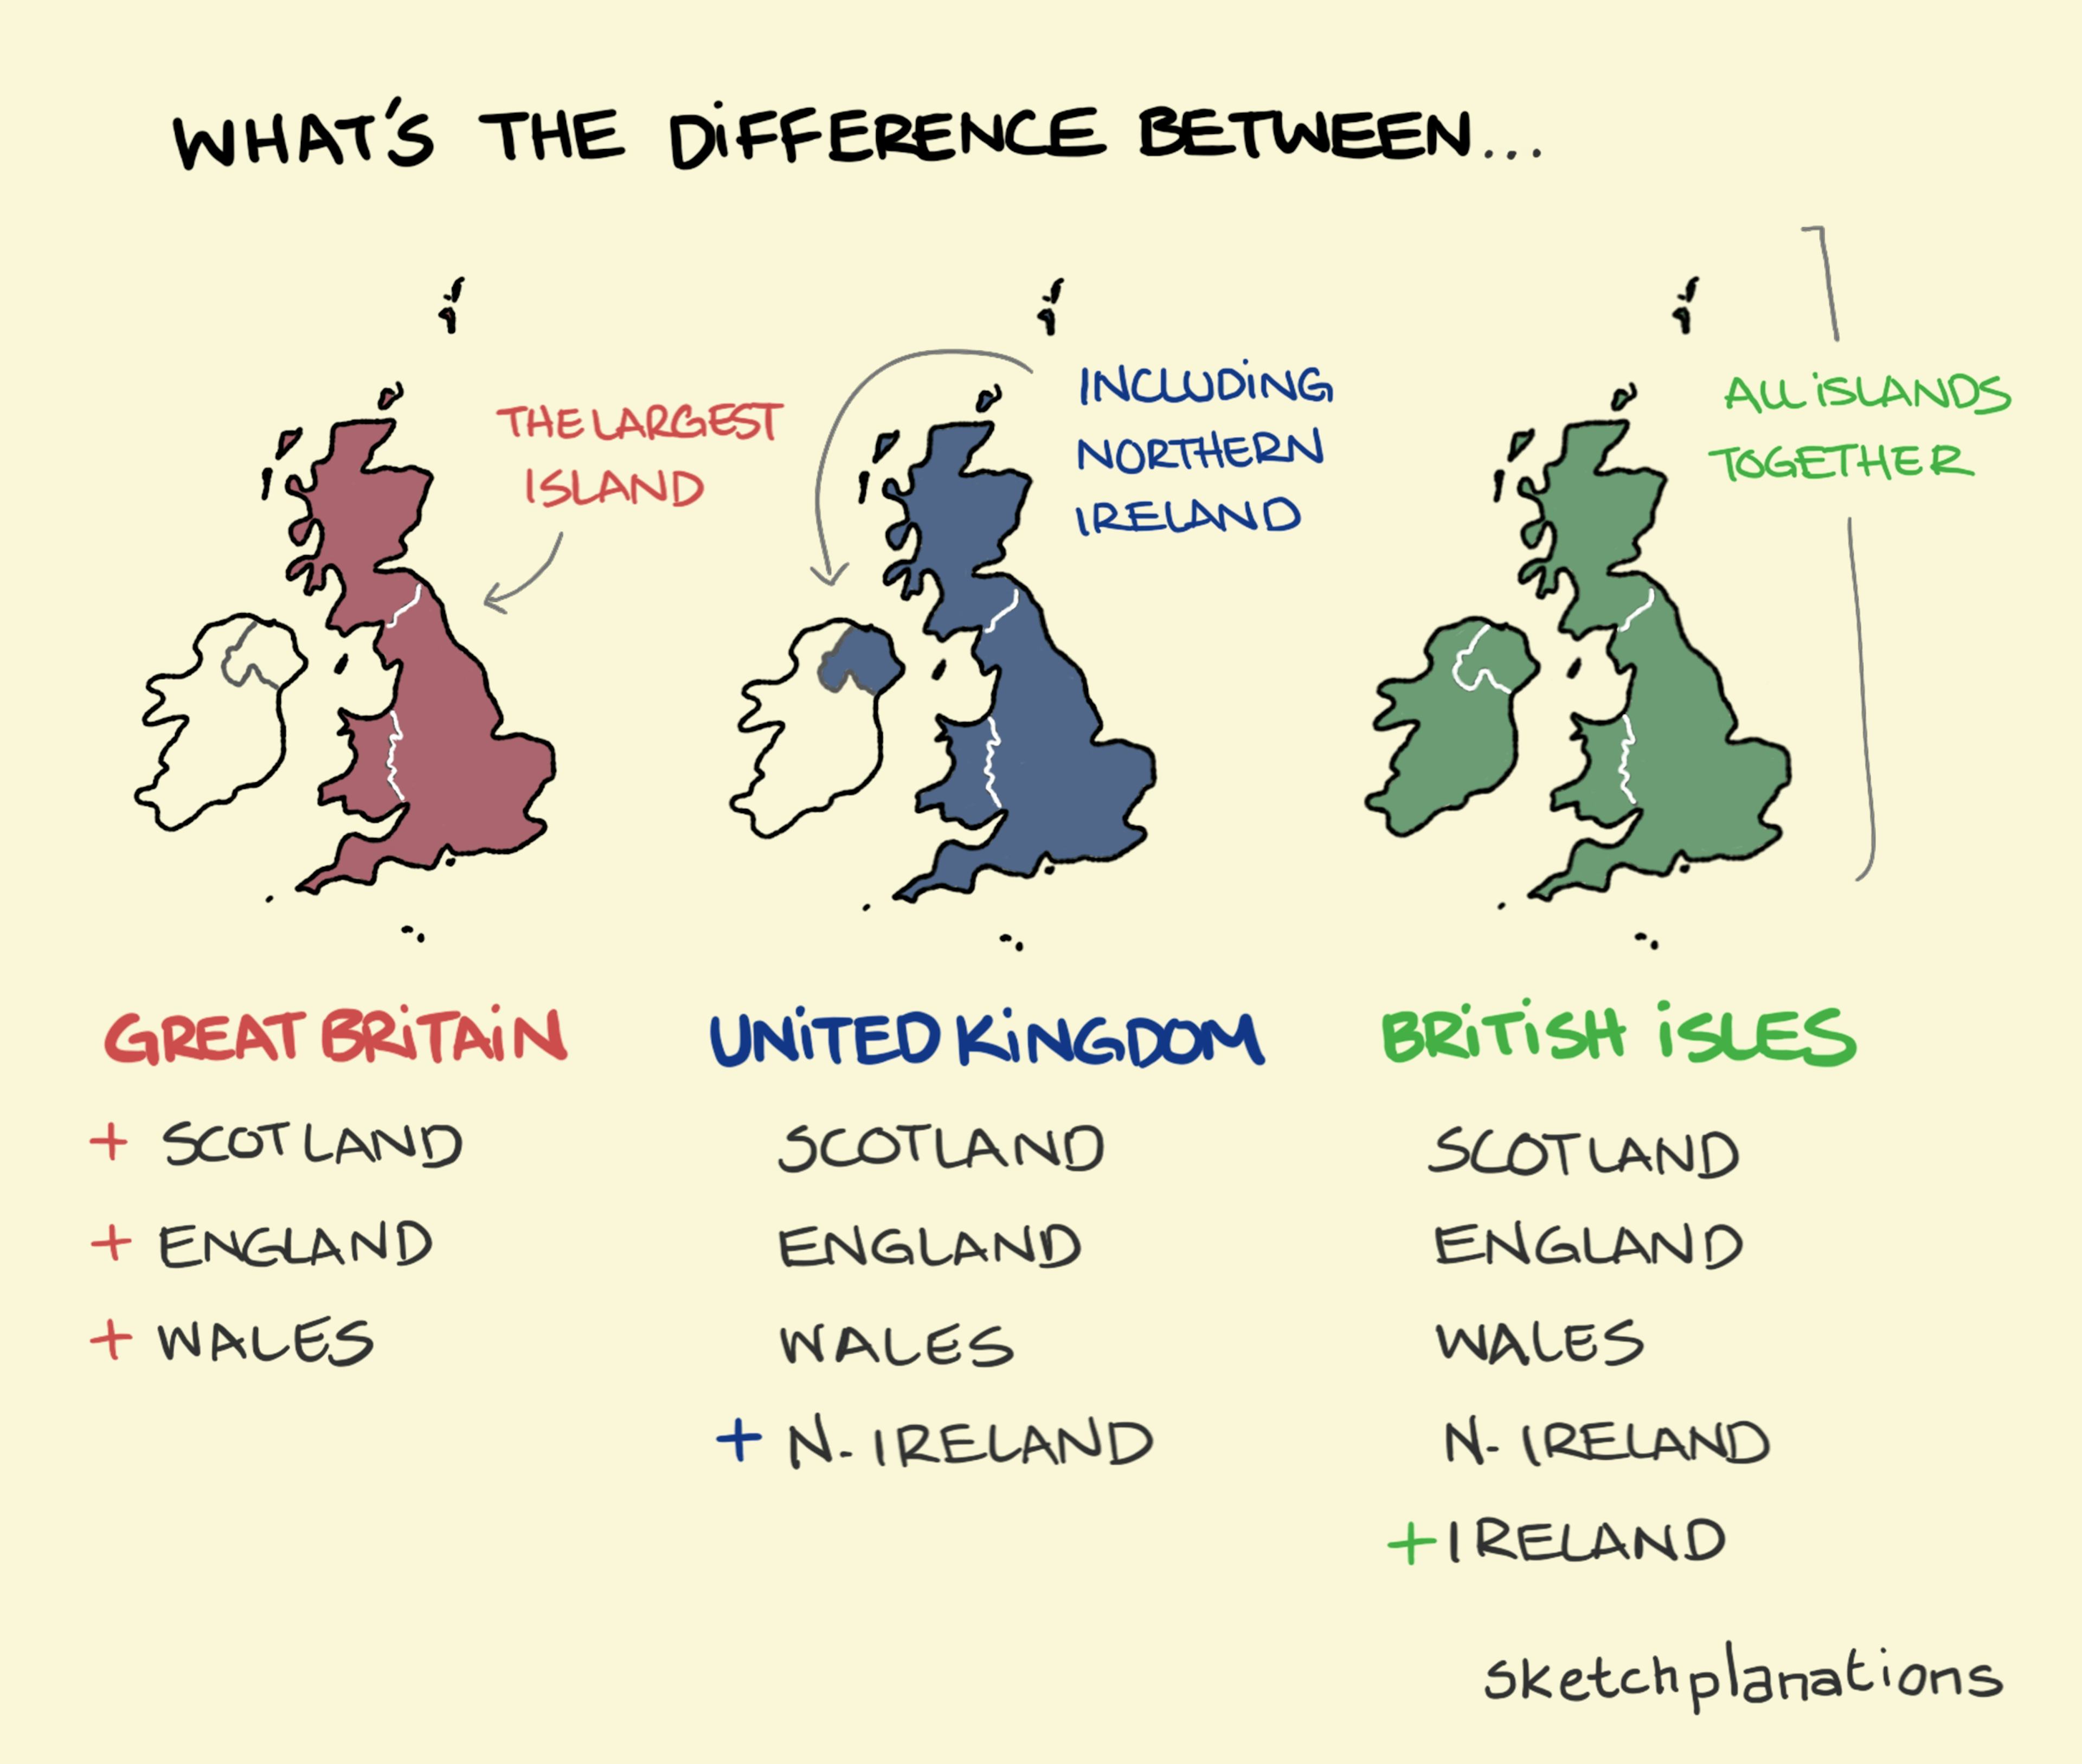 What's the difference between Great Britain, the United Kingdom and the British Isles - explained in a sketch with maps